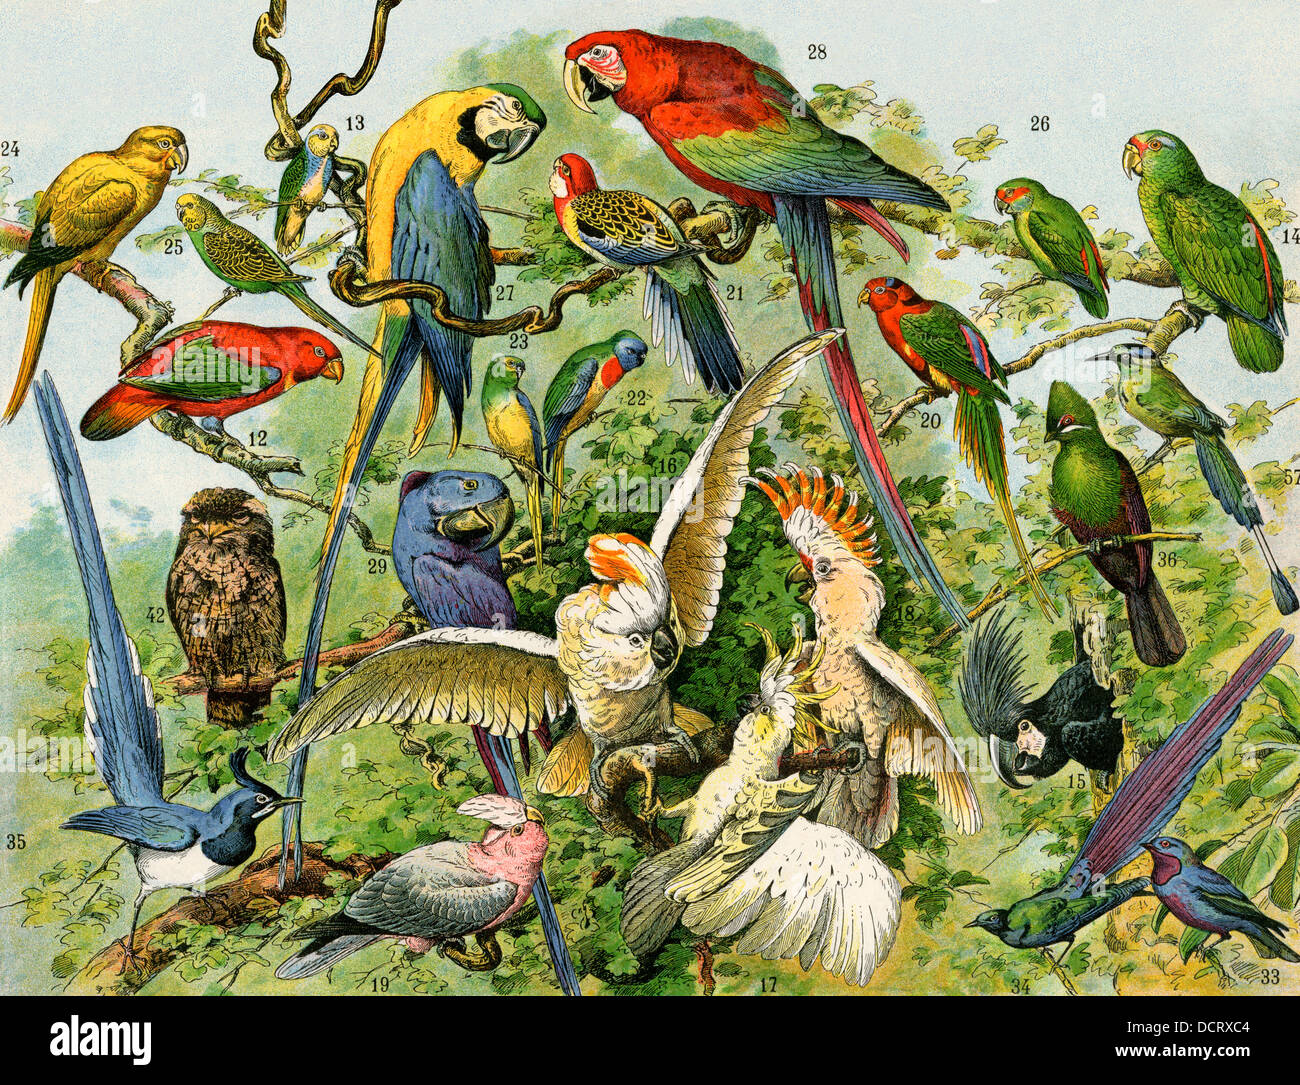 Parrots, cockatoos, and other jungle birds. Color lithograph Stock Photo